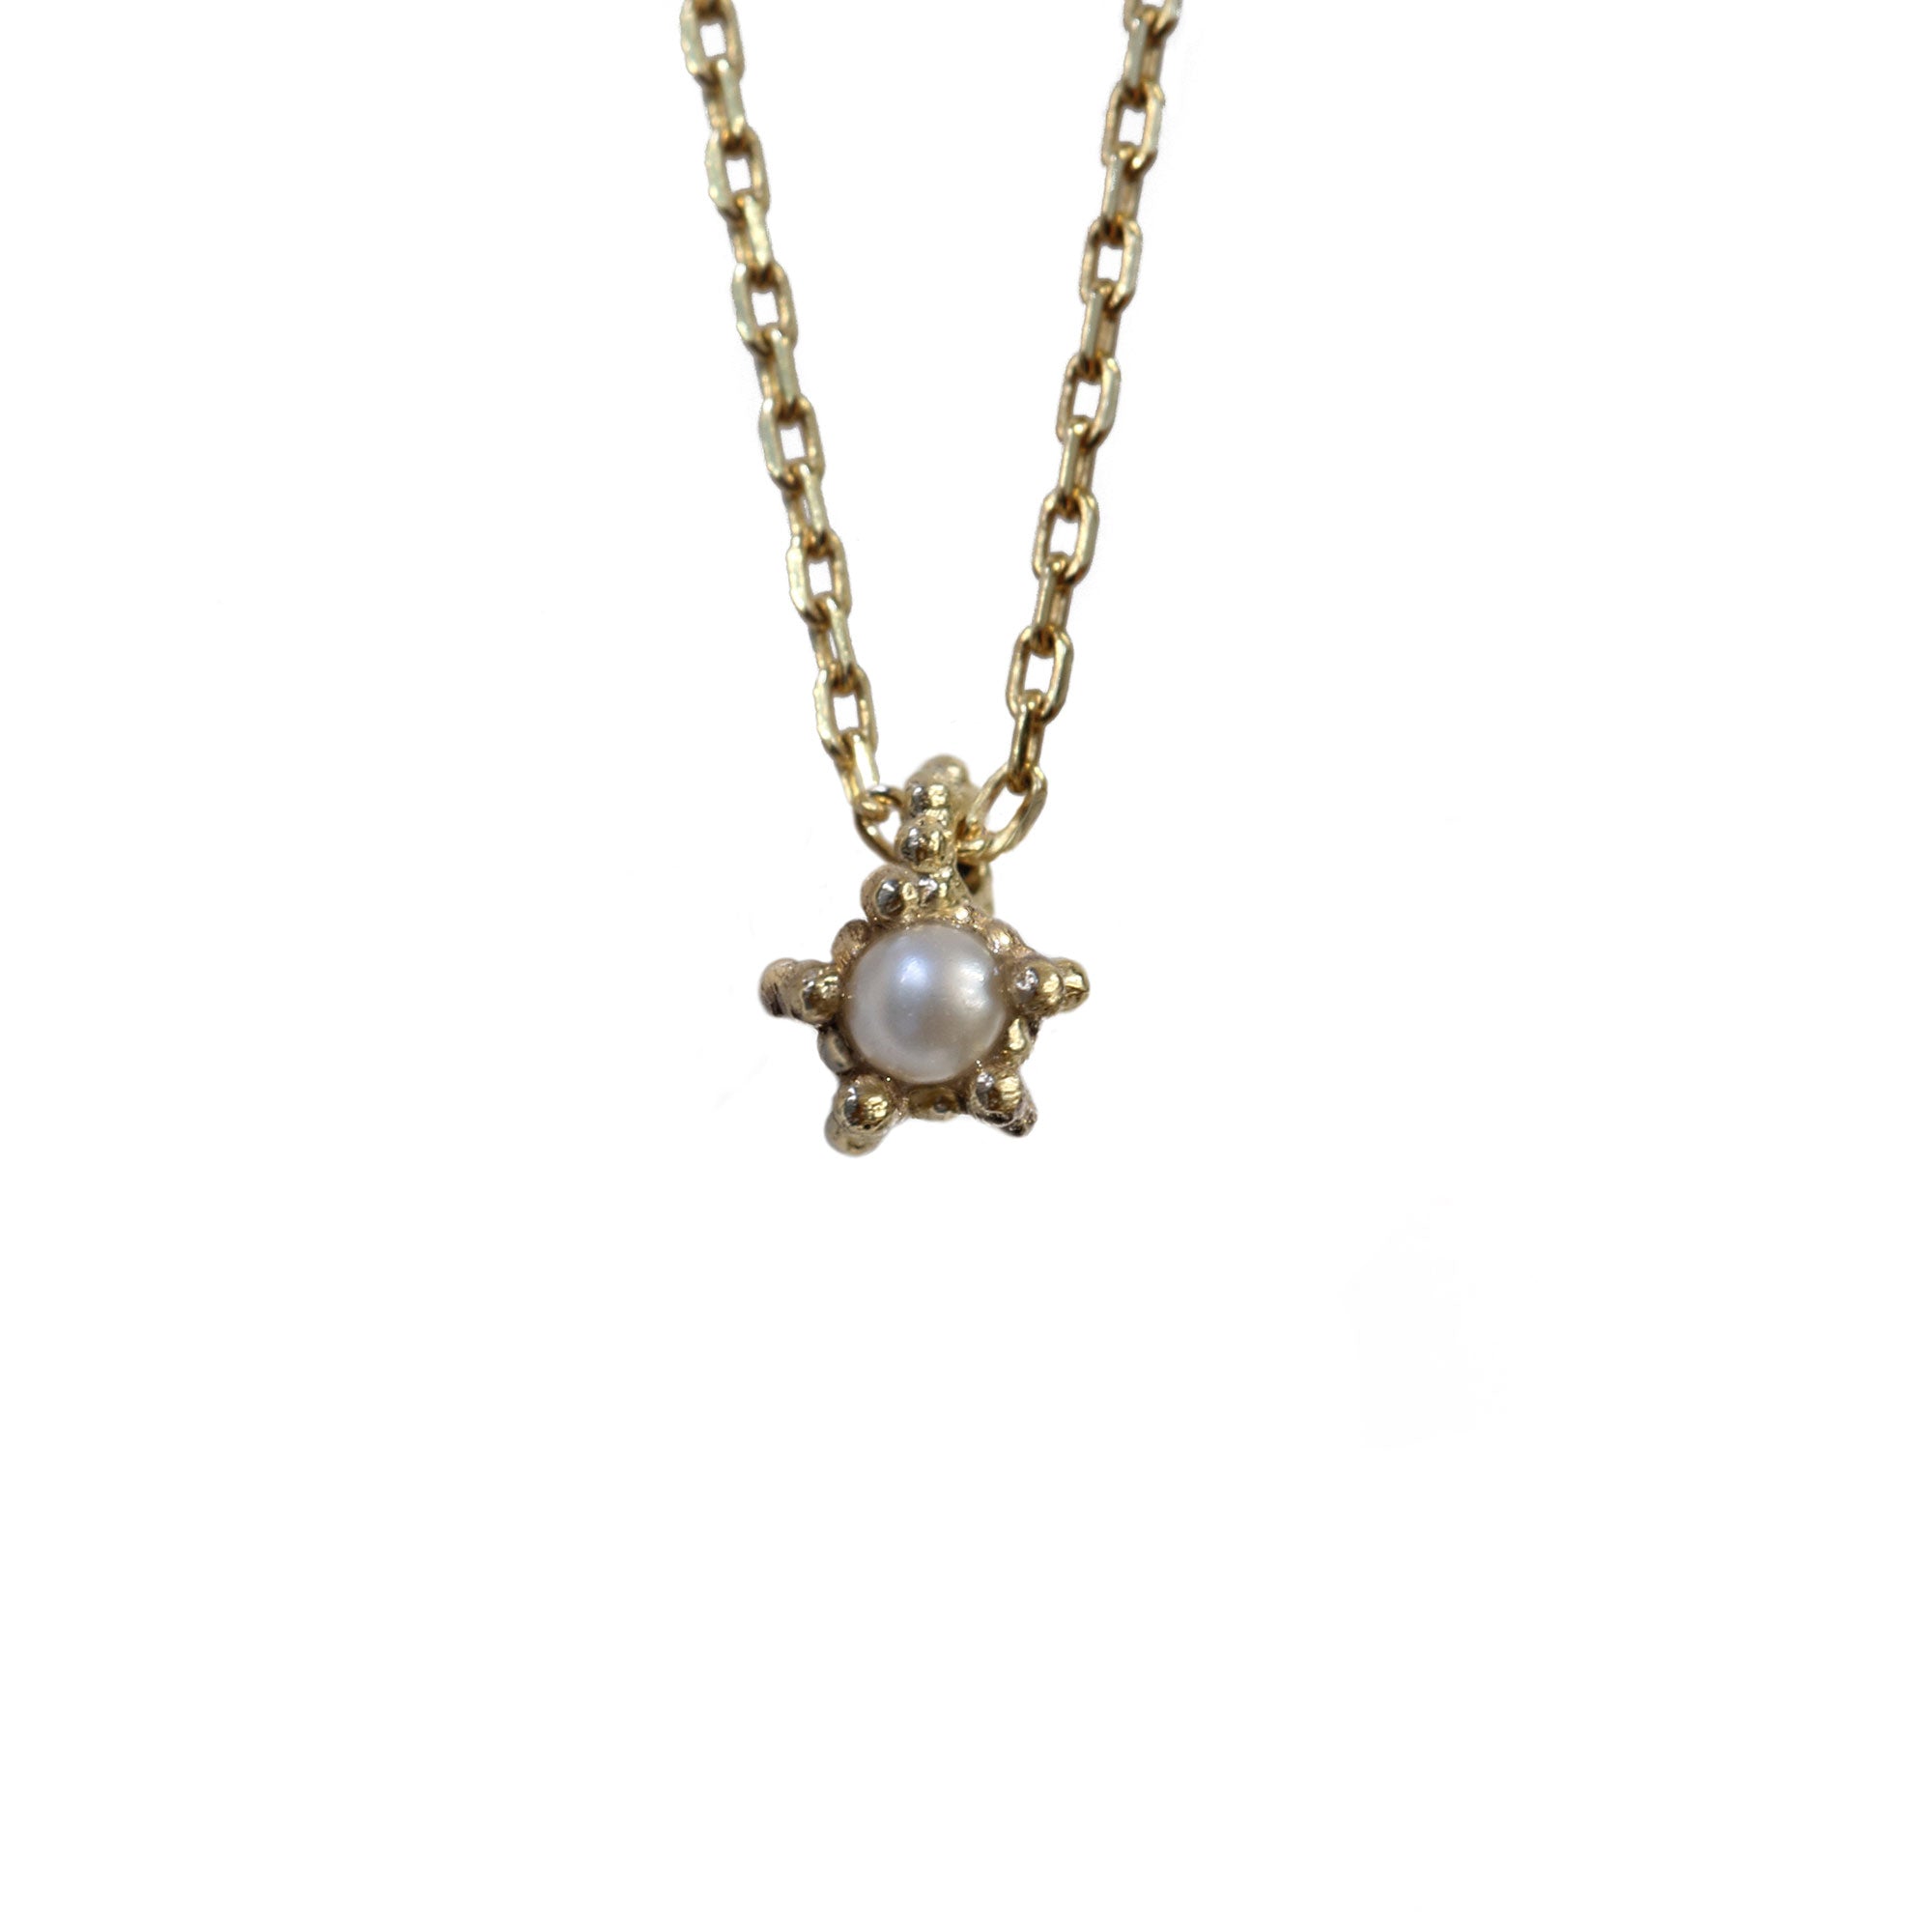 Tiny pearl textured gold necklace on white background